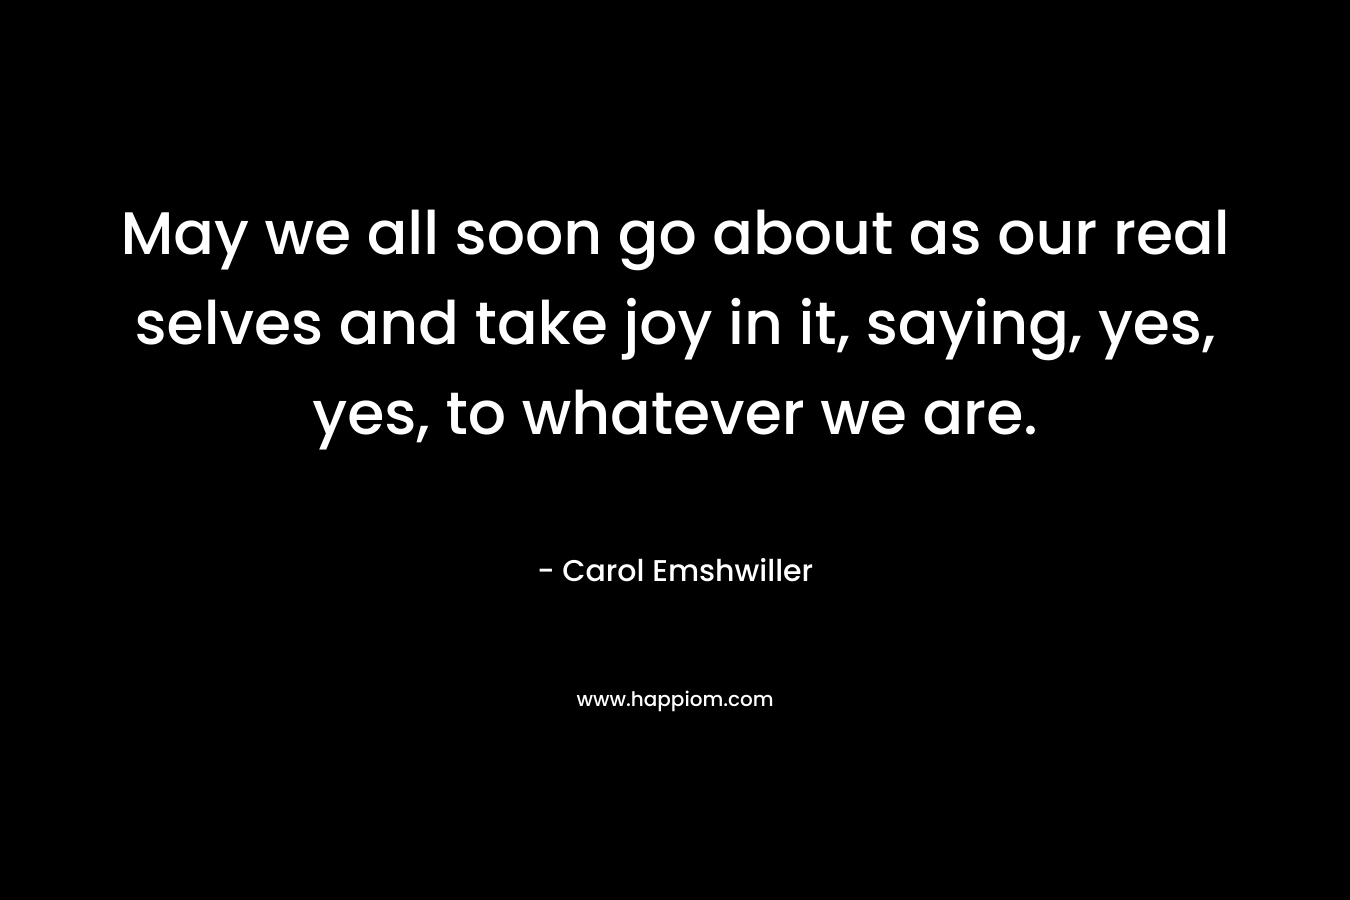 May we all soon go about as our real selves and take joy in it, saying, yes, yes, to whatever we are. – Carol Emshwiller